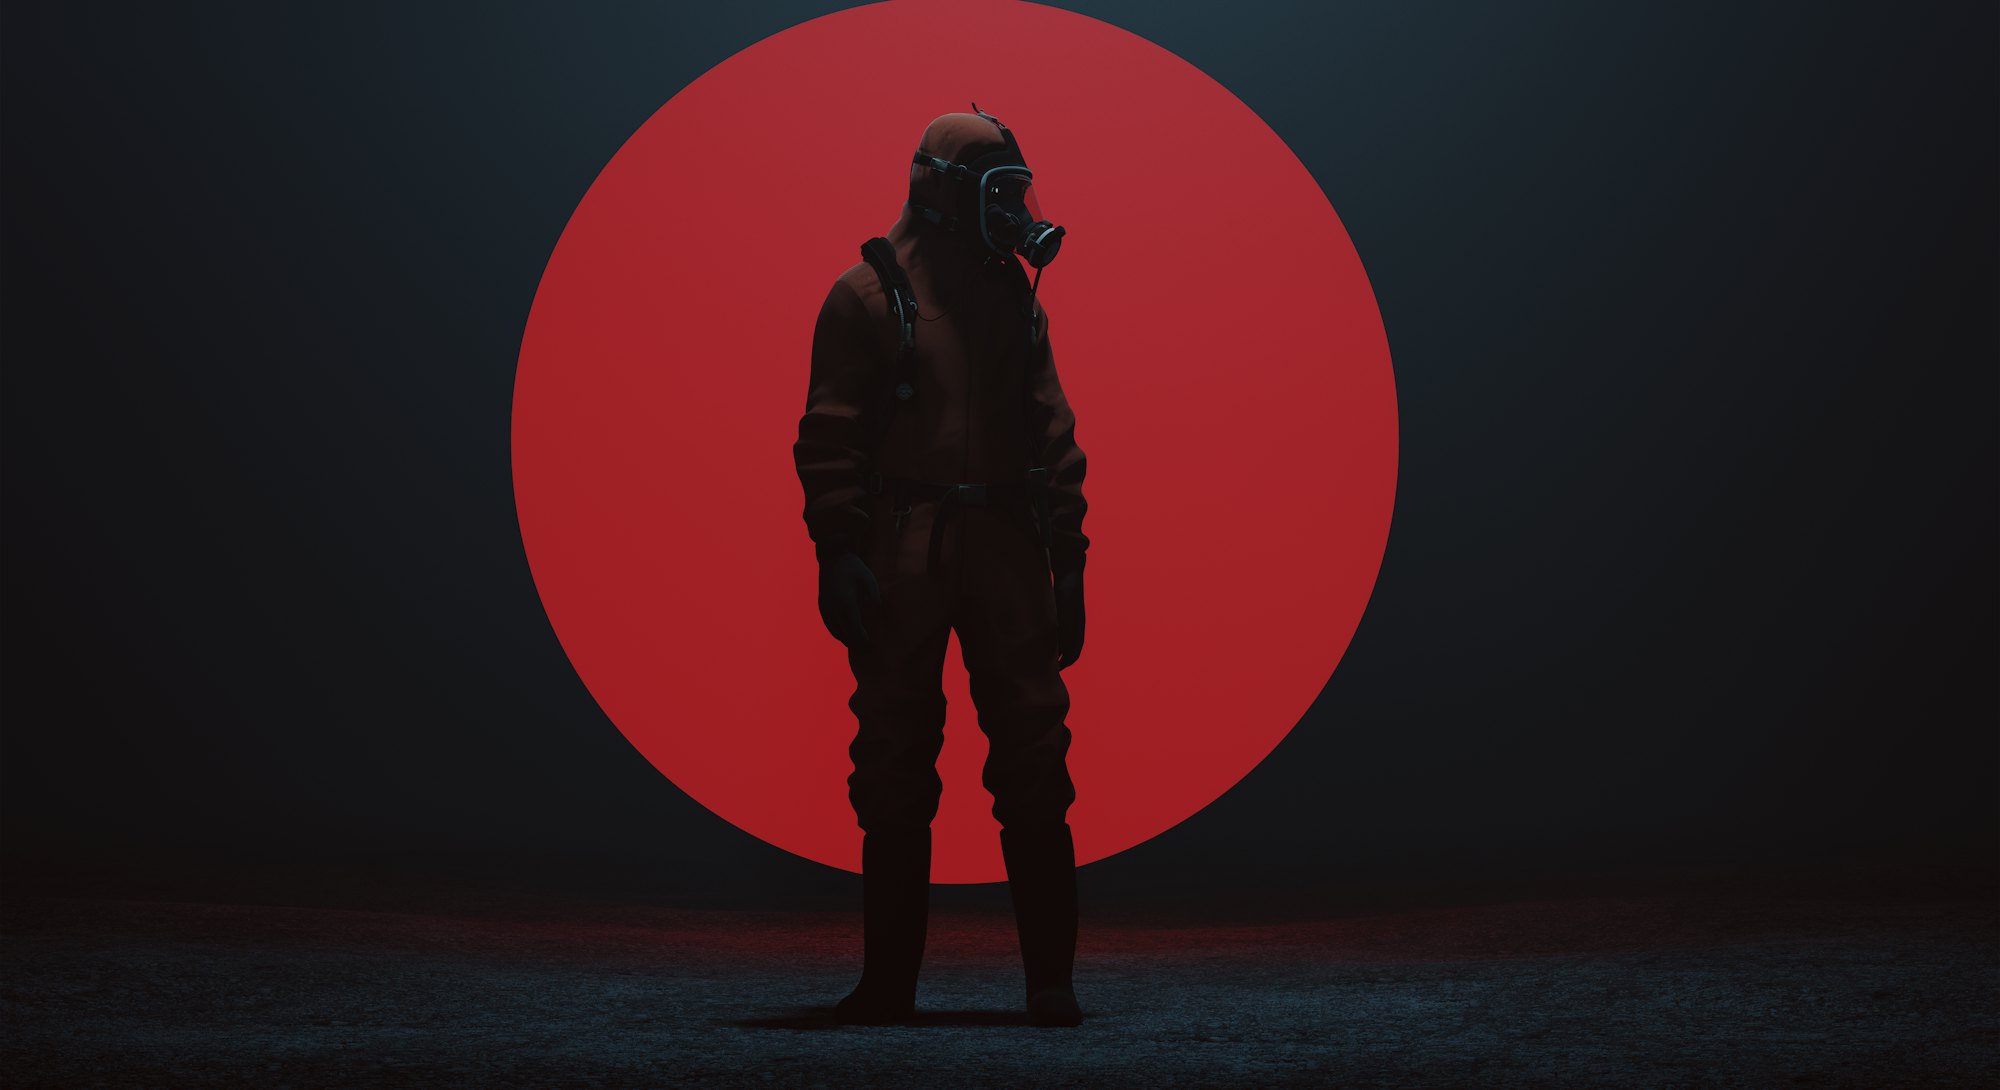 Man in a Hazmat suit with a Big Red Sphere in a foggy void 3d Illustration 3d render